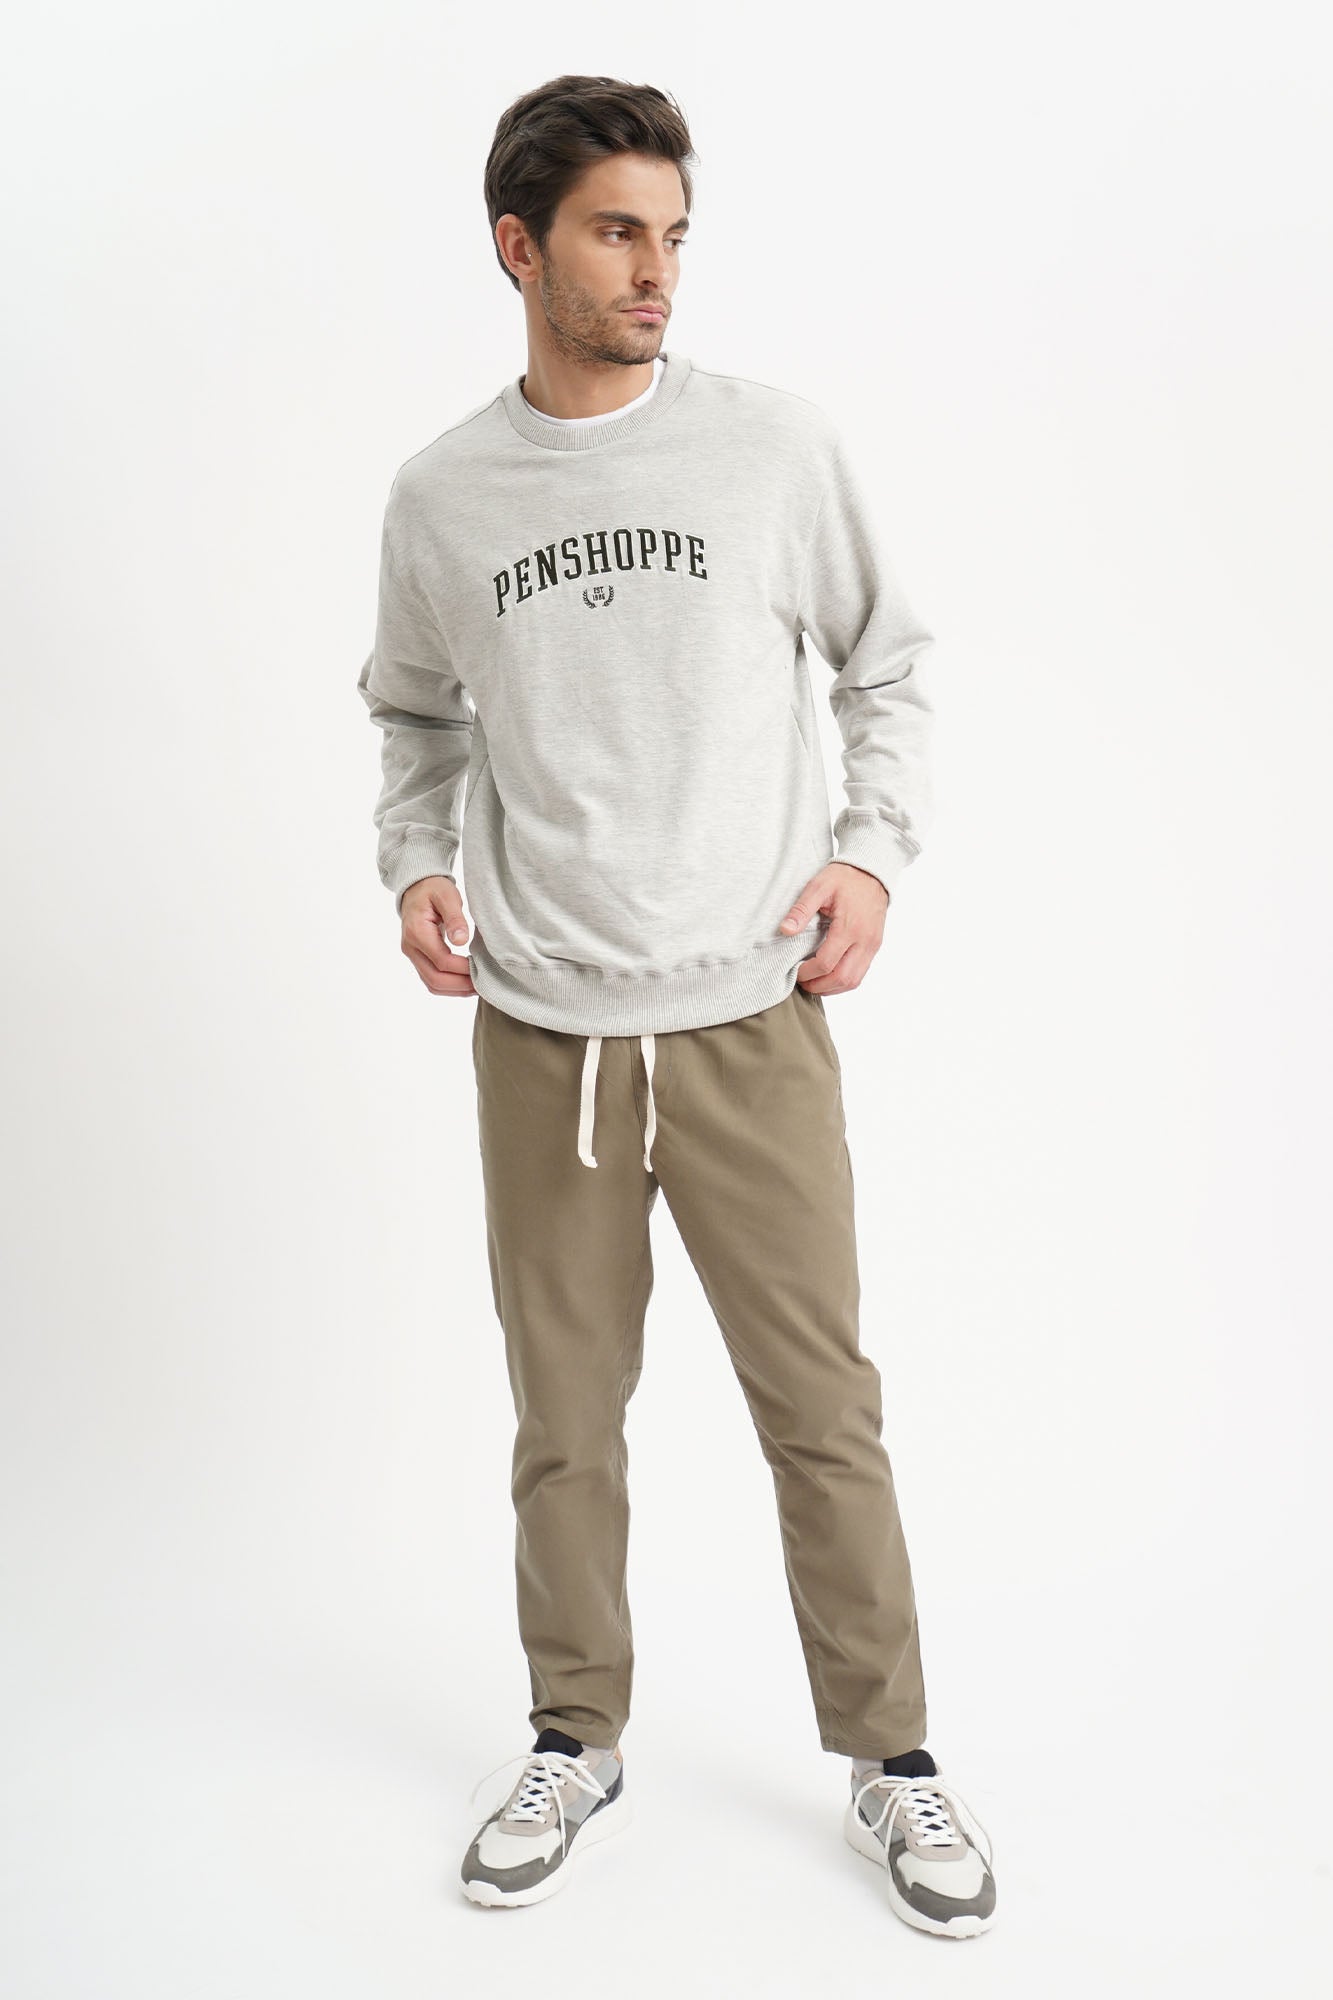 Relaxed Fit Pullover with Penshoppe Embroidery